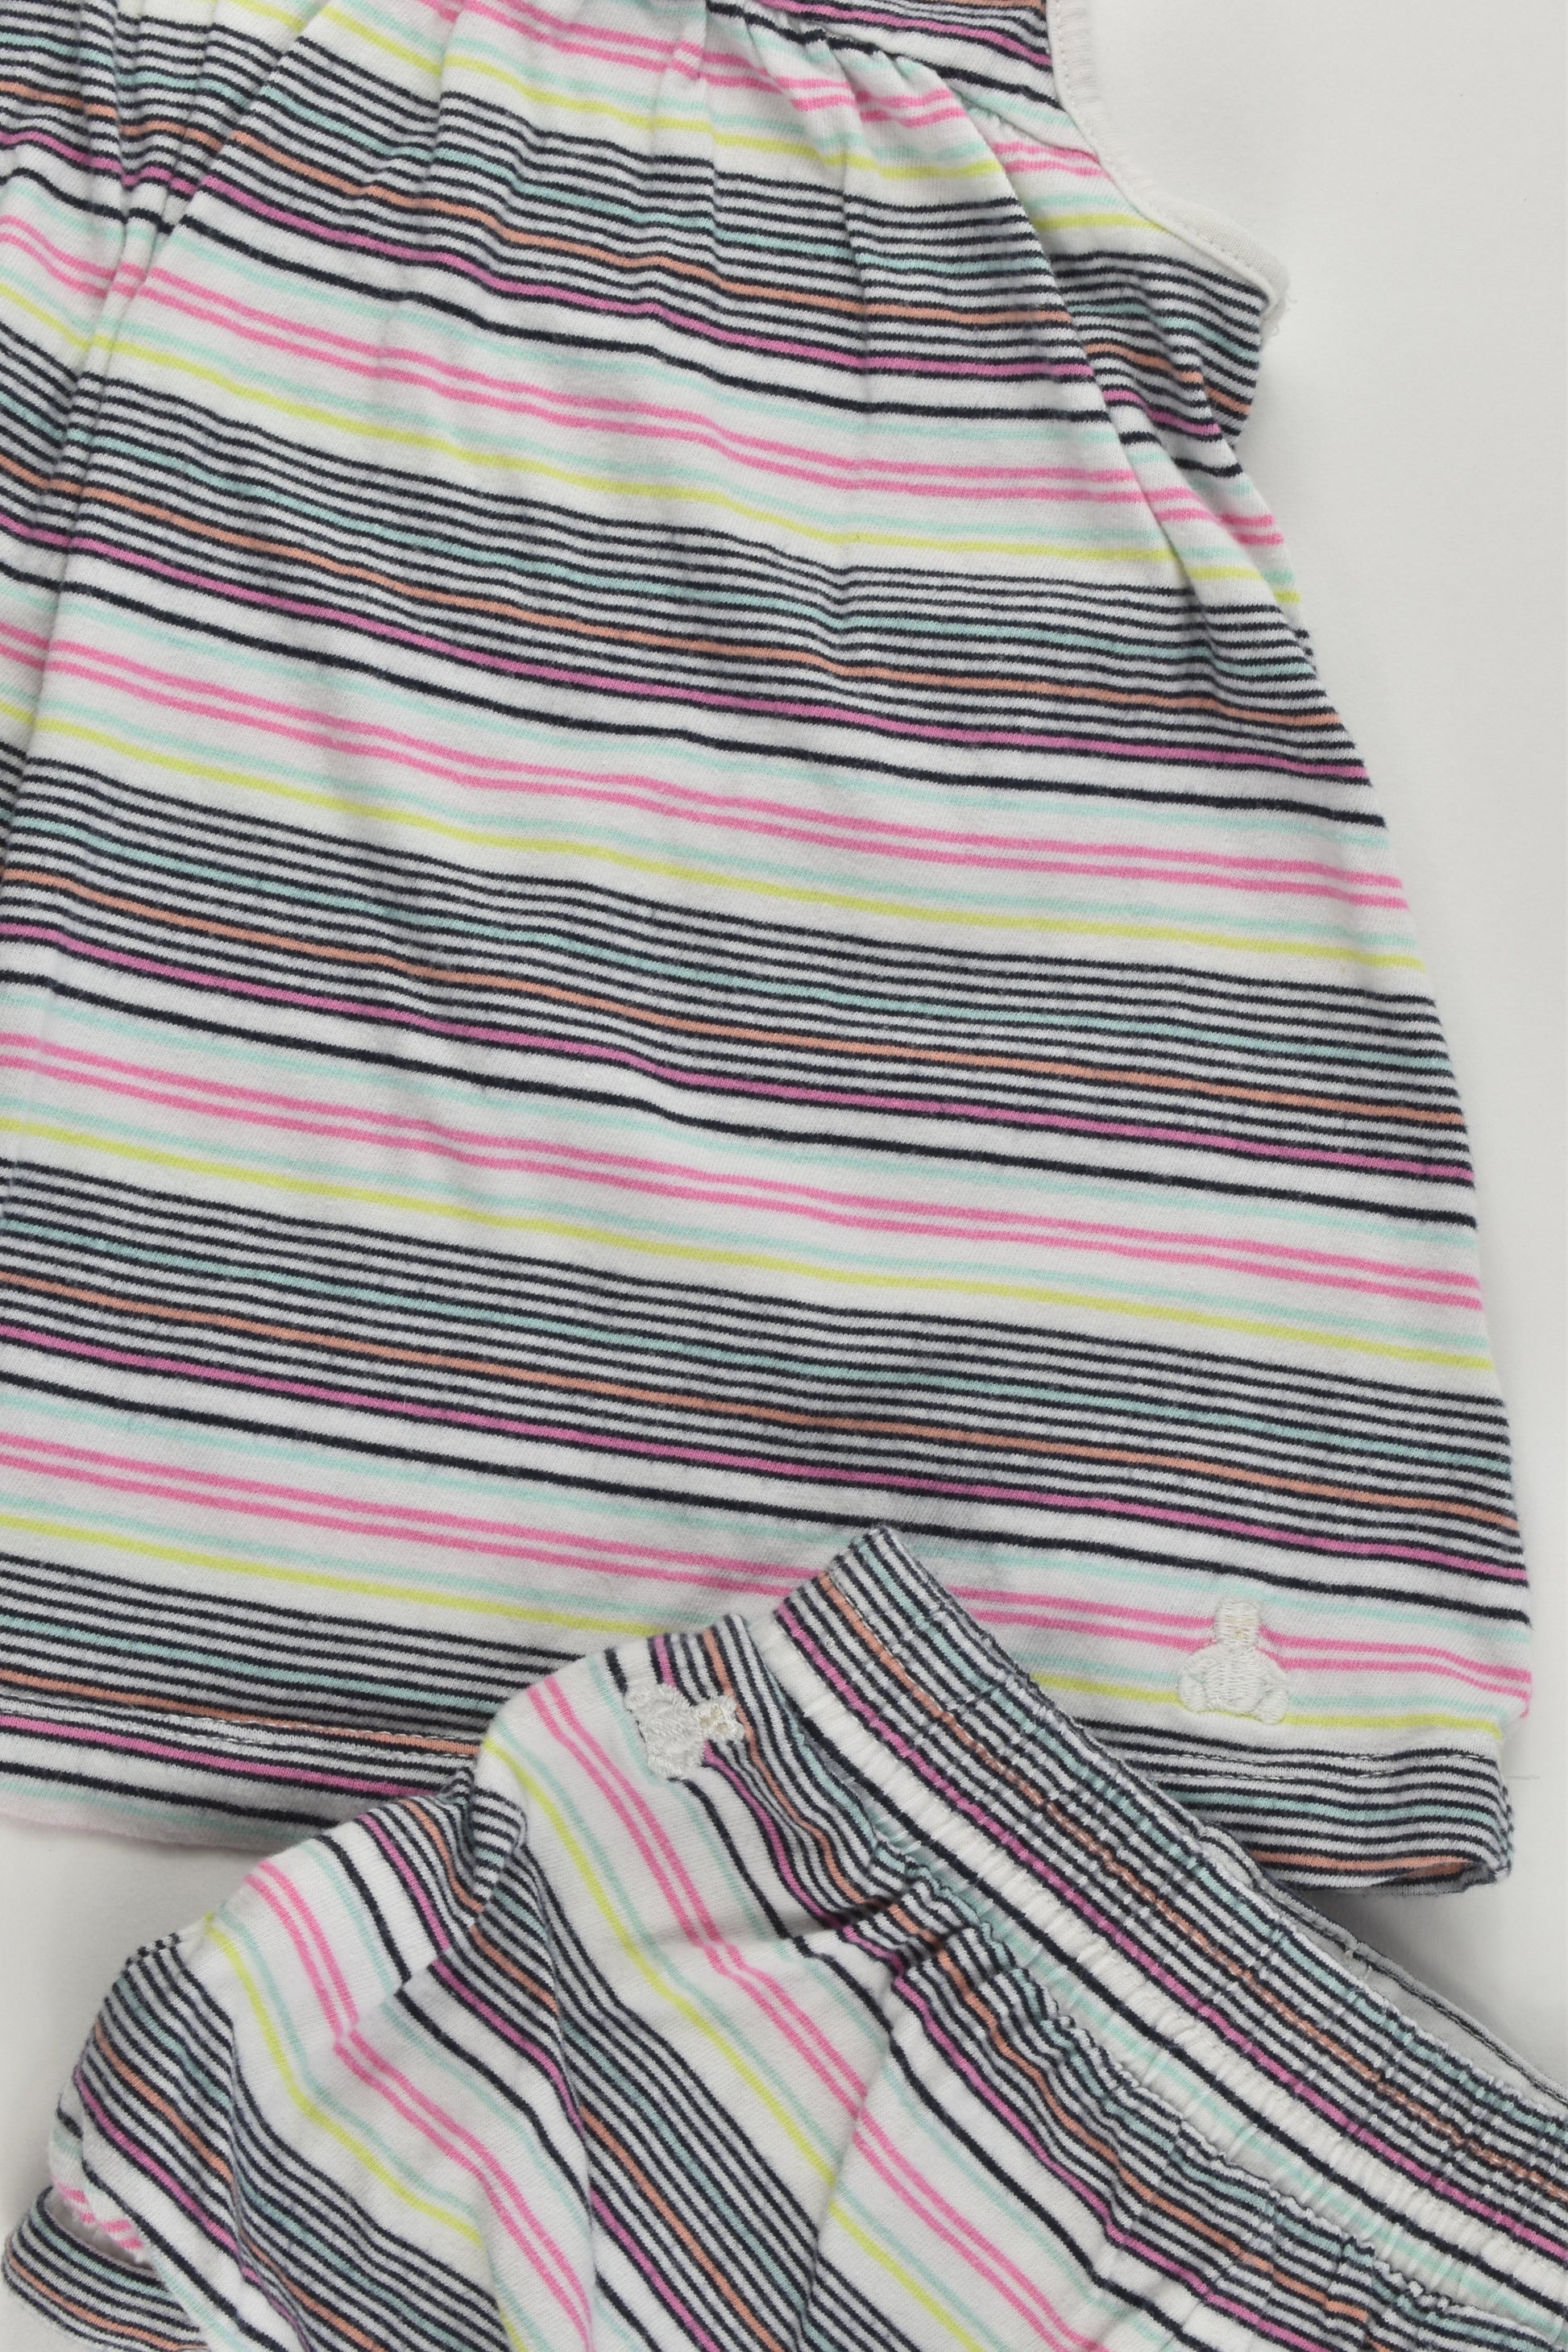 Gap Size 3-4 Striped Outfit